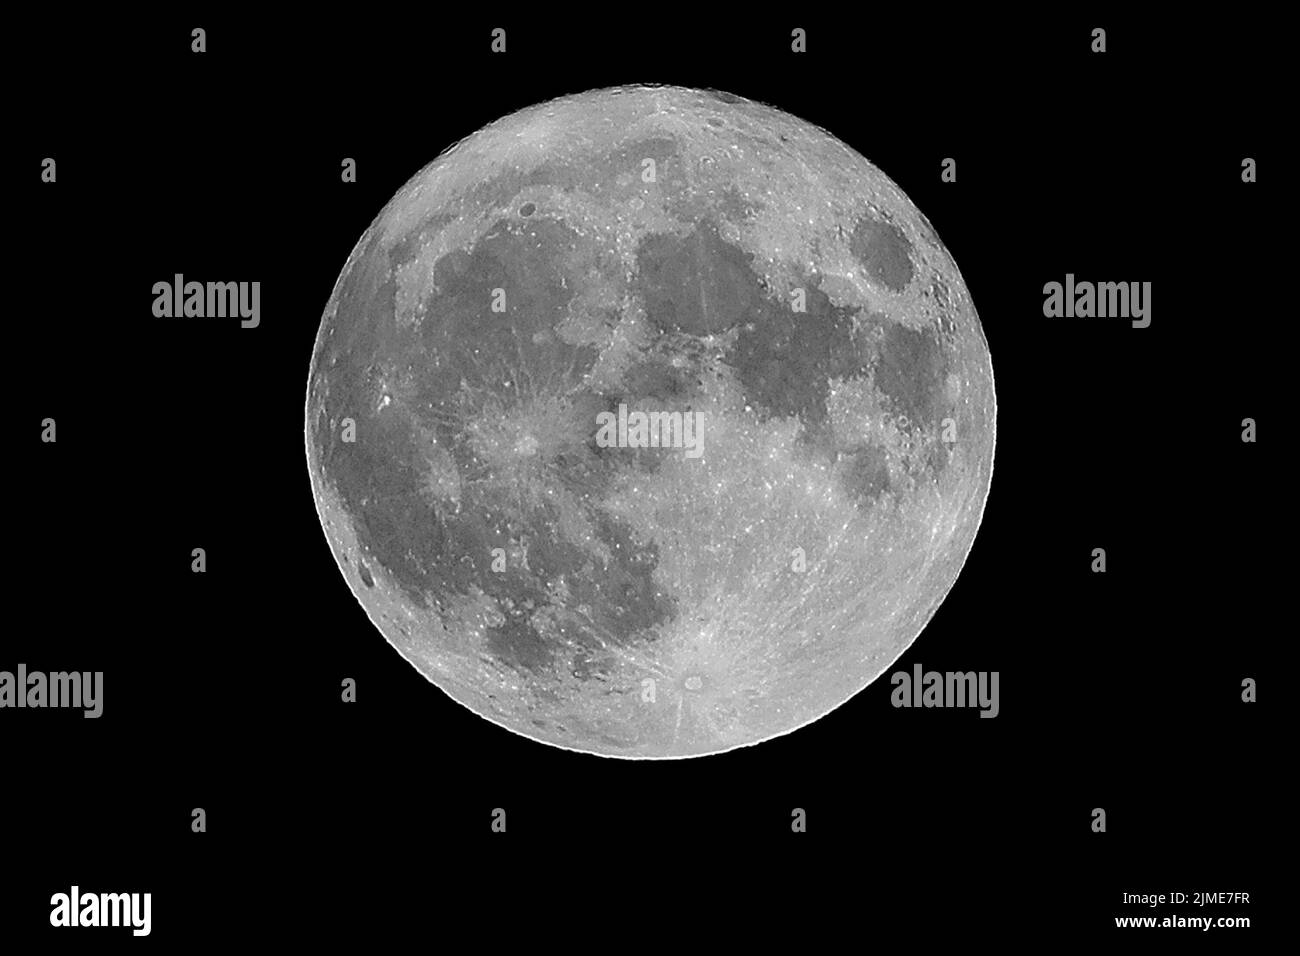 huge super full moon that you can see well even the craters at night Stock Photo